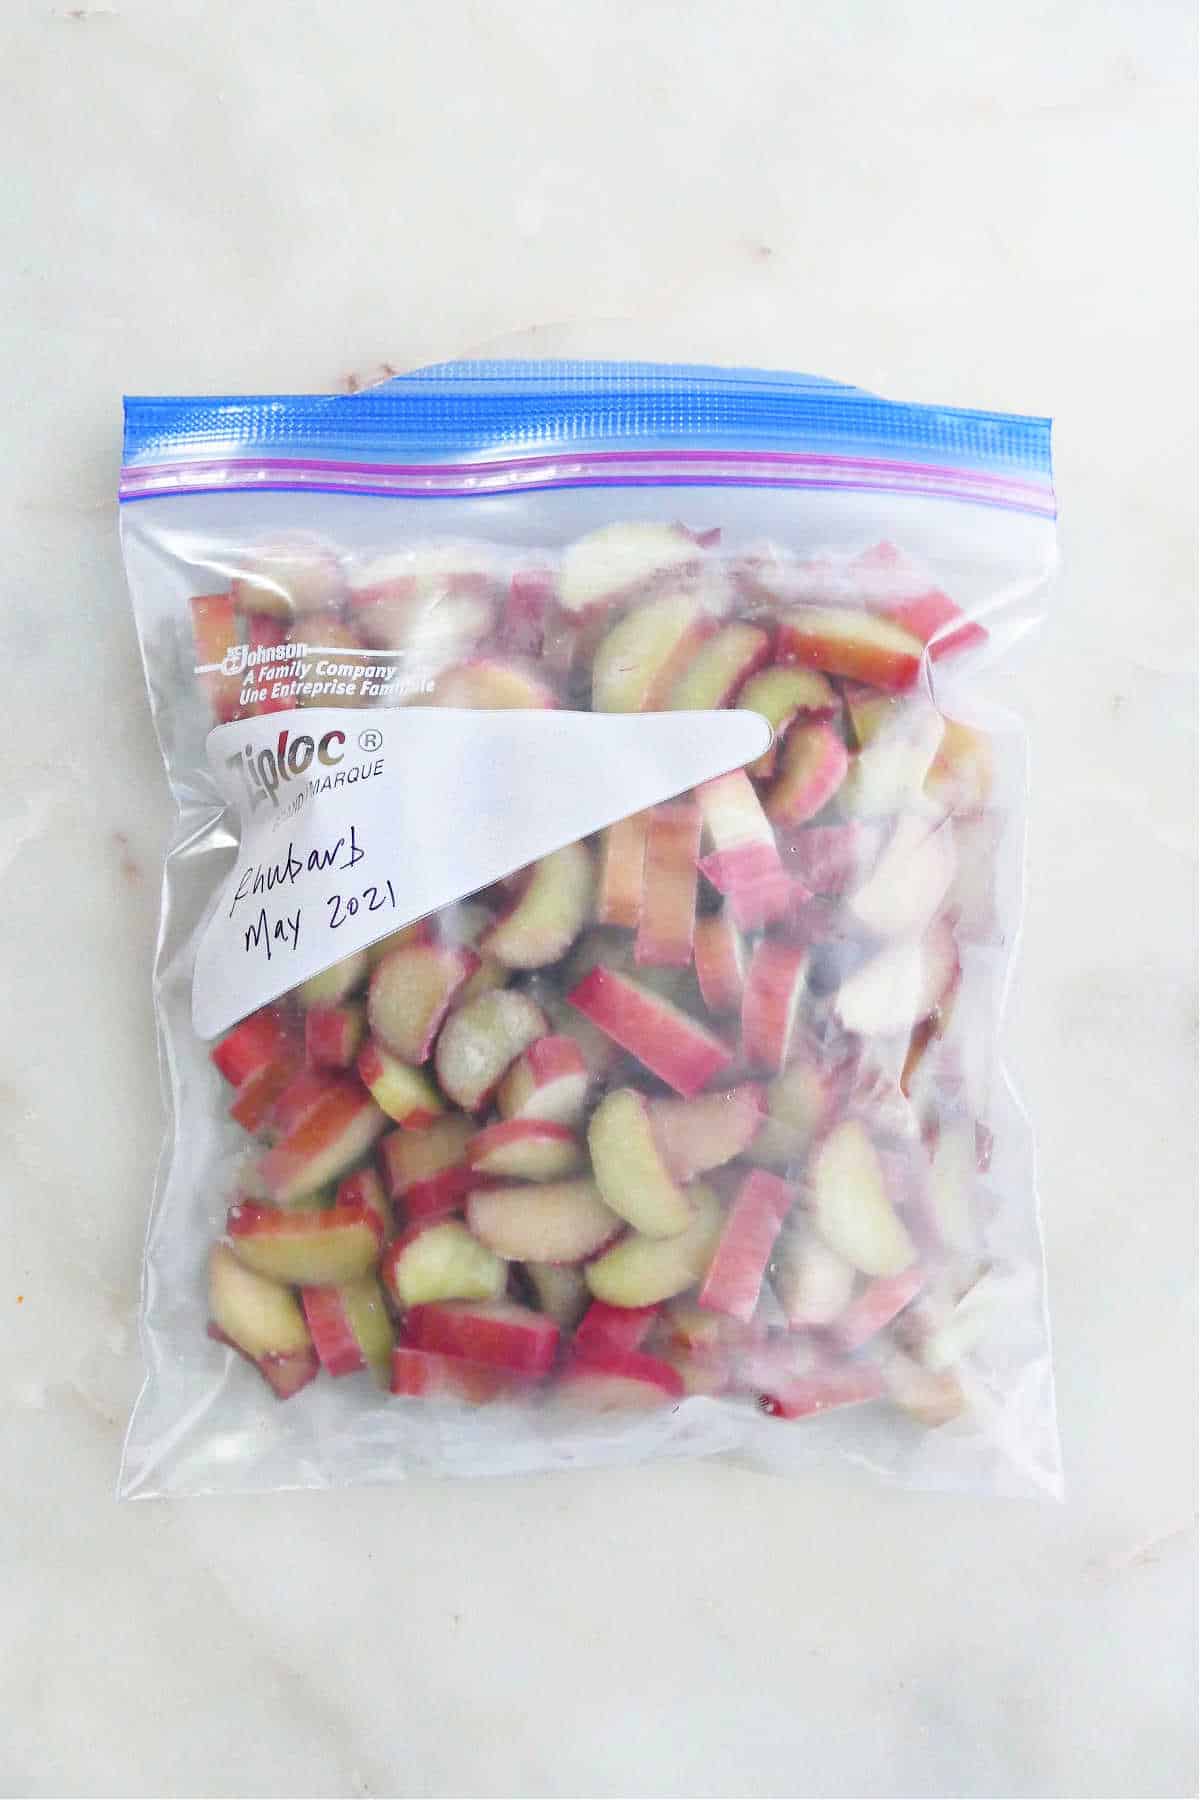 frozen rhubarb pieces in a Ziploc bag on a counter